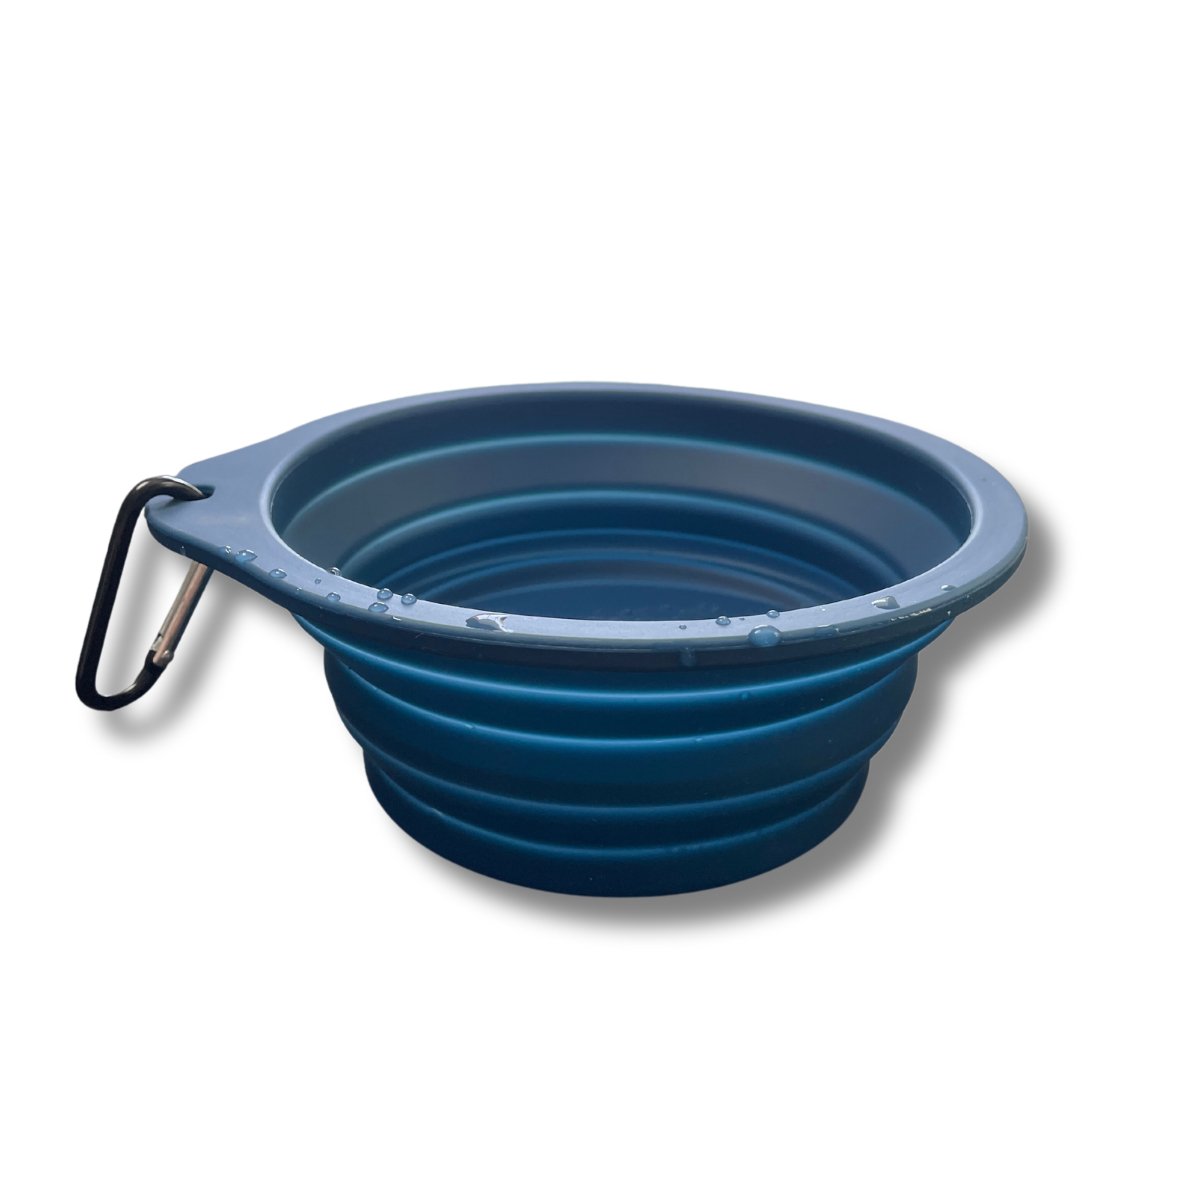 Snack 'n' Slurp Collapsible Bowl, Collapsible Dog Bowl - Tito's Closet